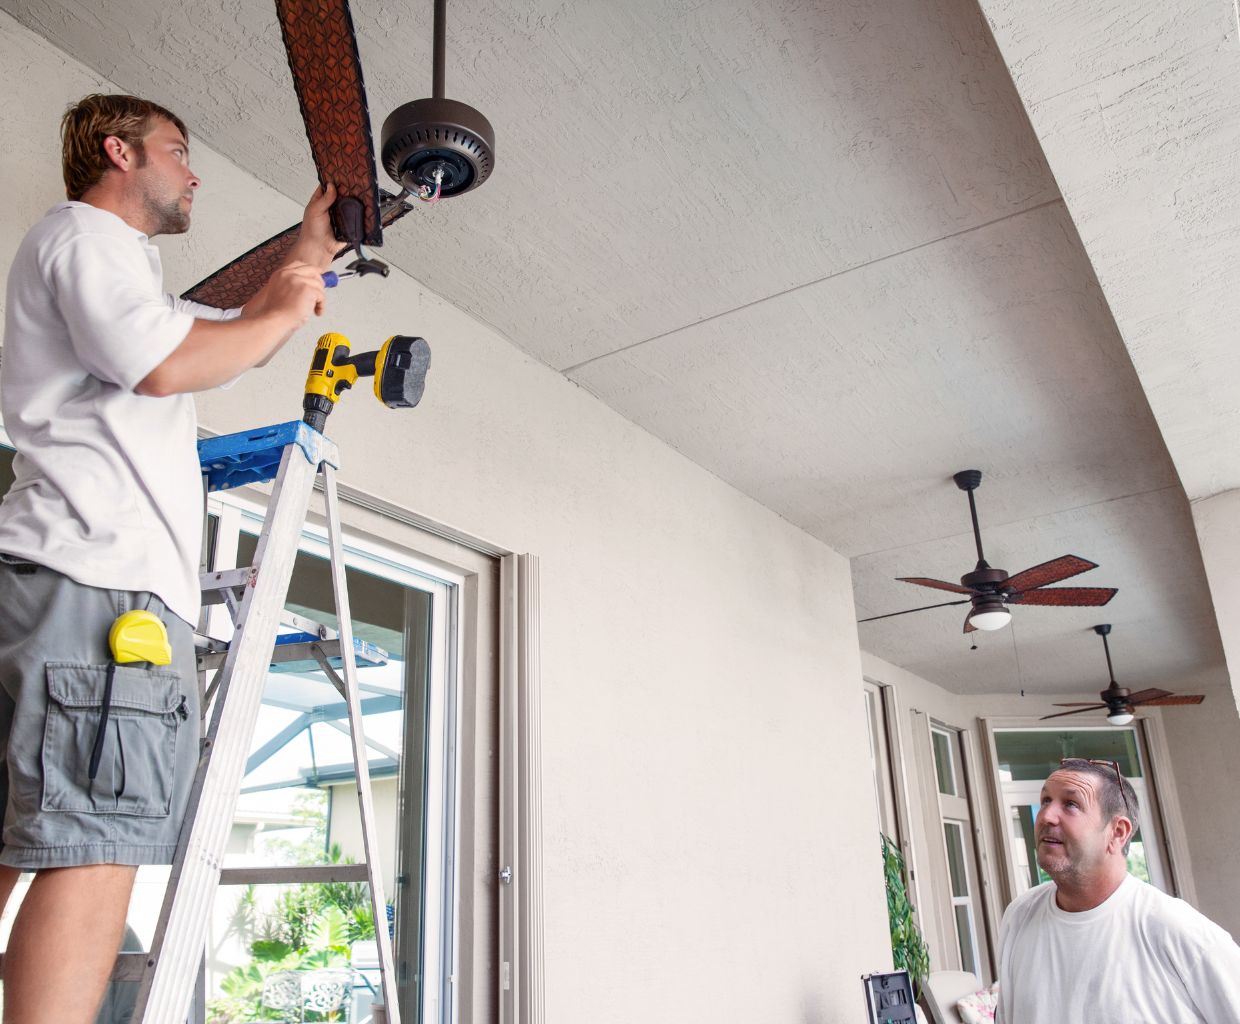 5 Tips To Choose The Best Ceiling Fan For You